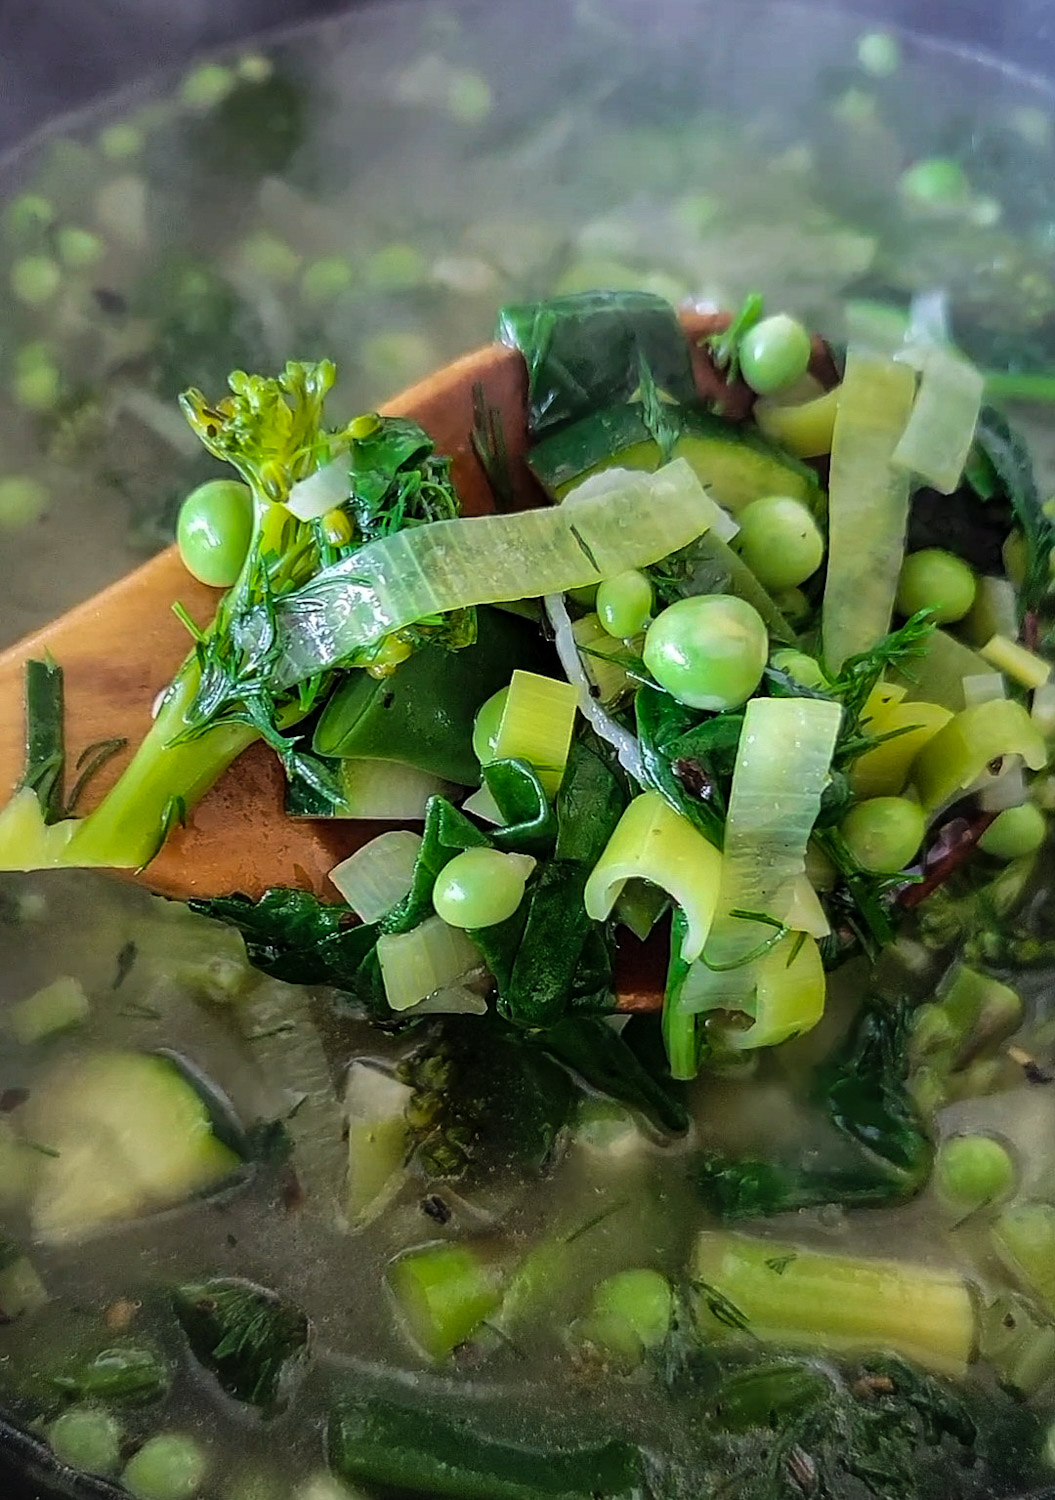 Stirring a pot of Spring vegetables in broth. The vegetables are leeks, peas, broccoli, zucchini and asparagus